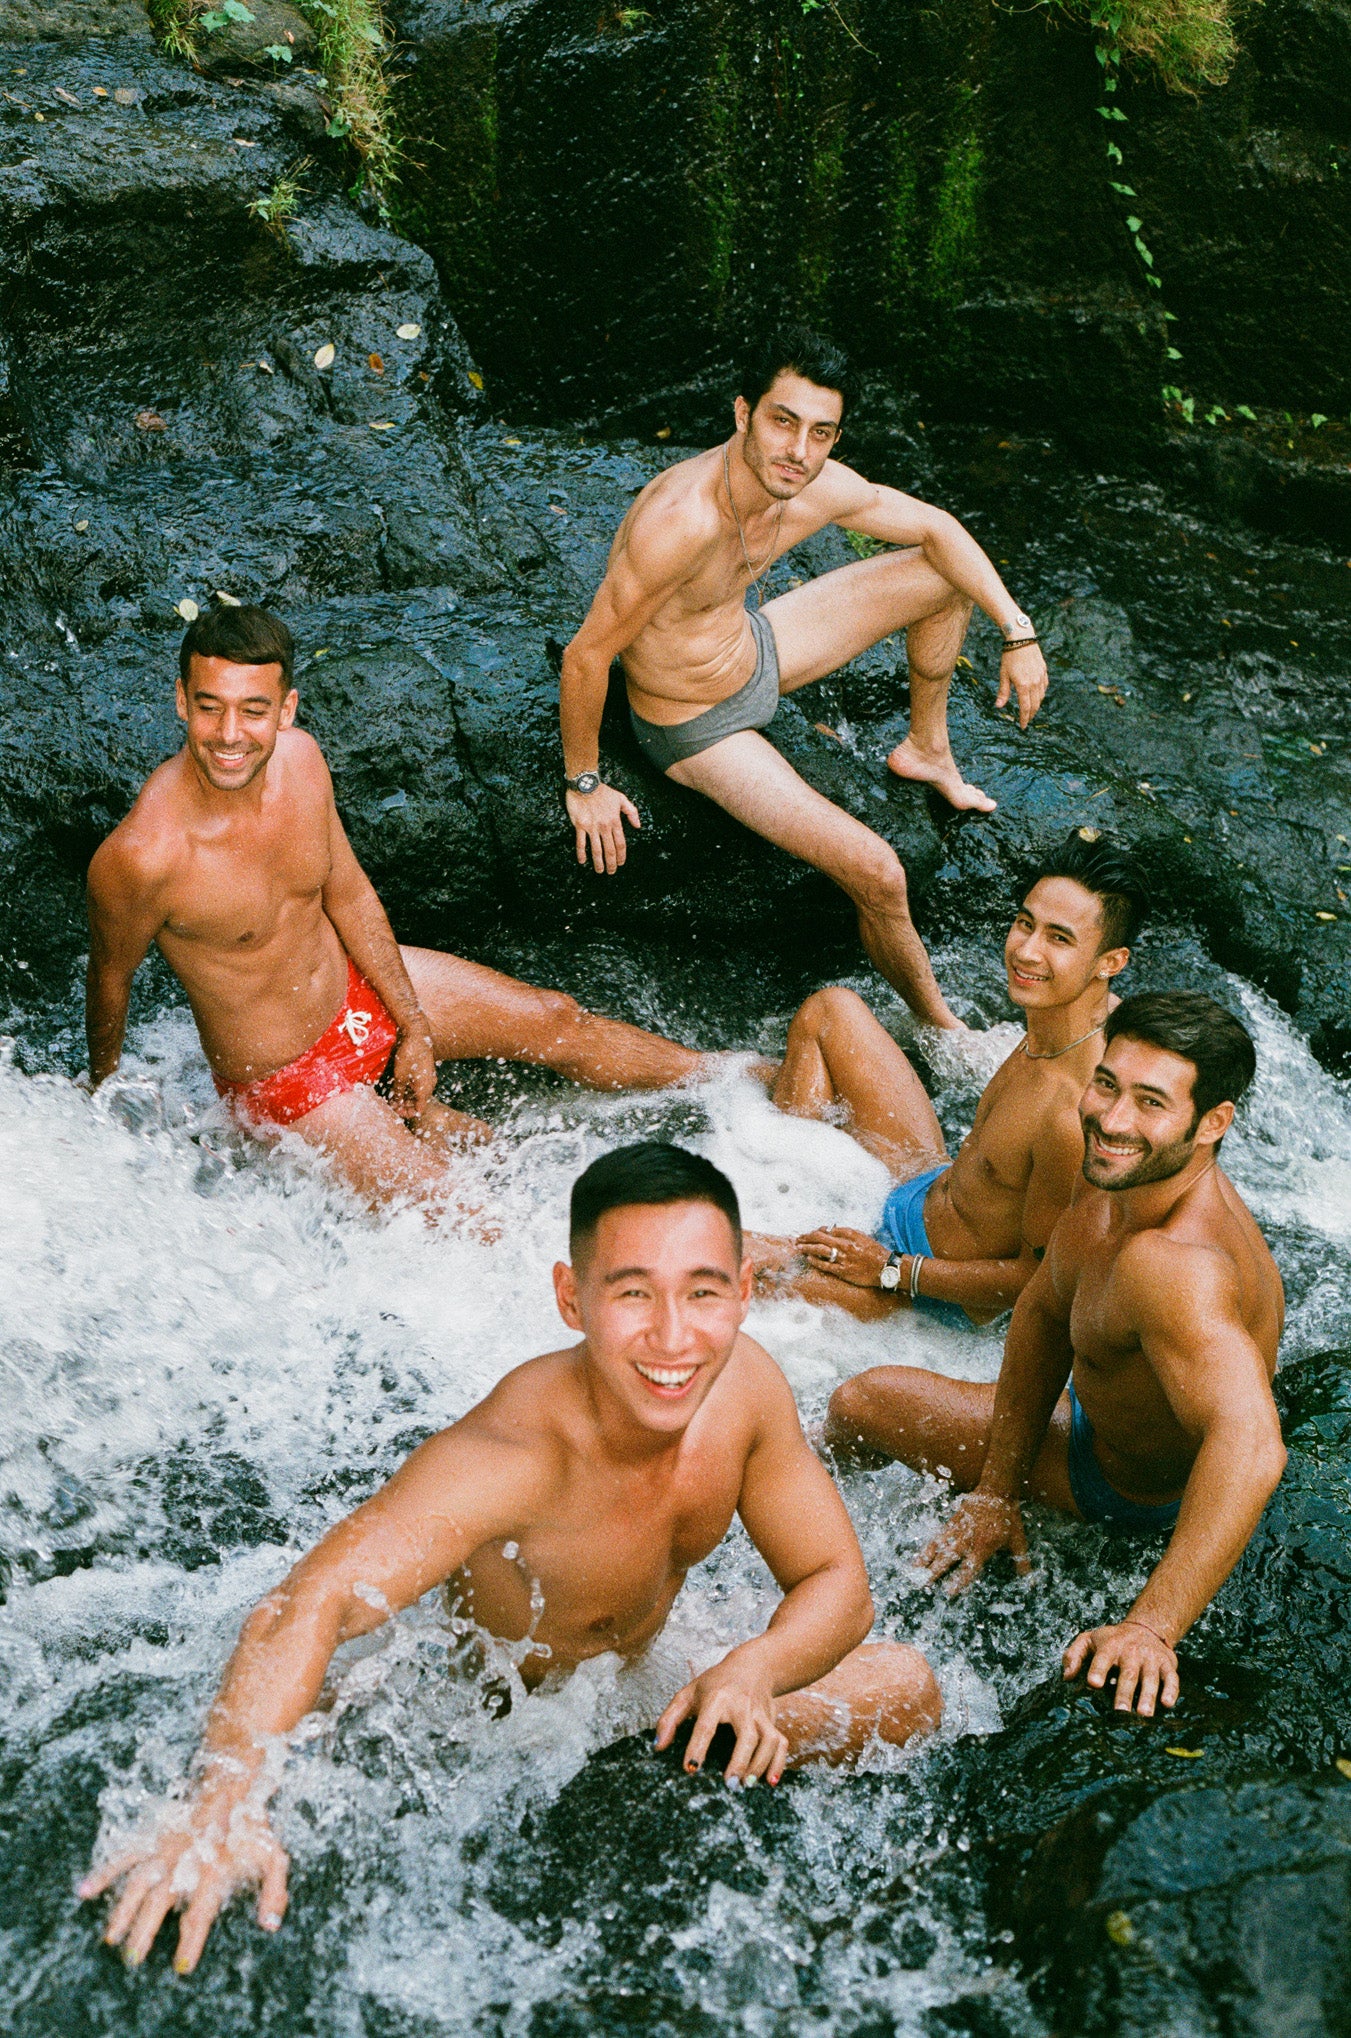 Look Book Shot Bodies As Clothing Men at the watefall